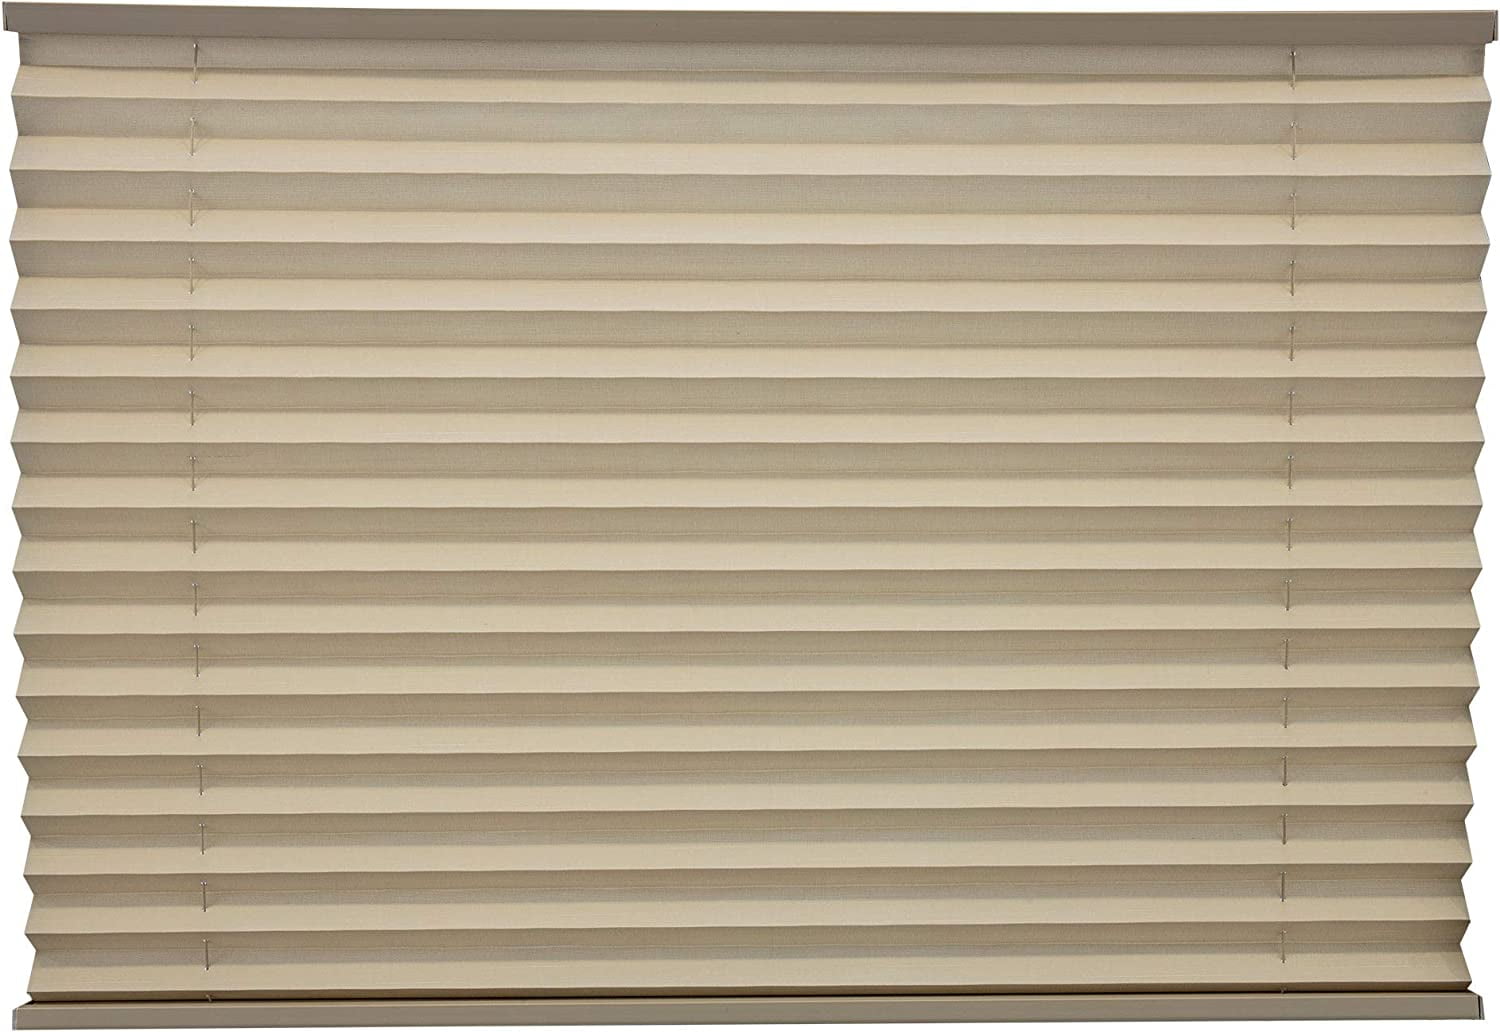 RecPro Pleated Shades in Black for RVs/Campers 50x24 